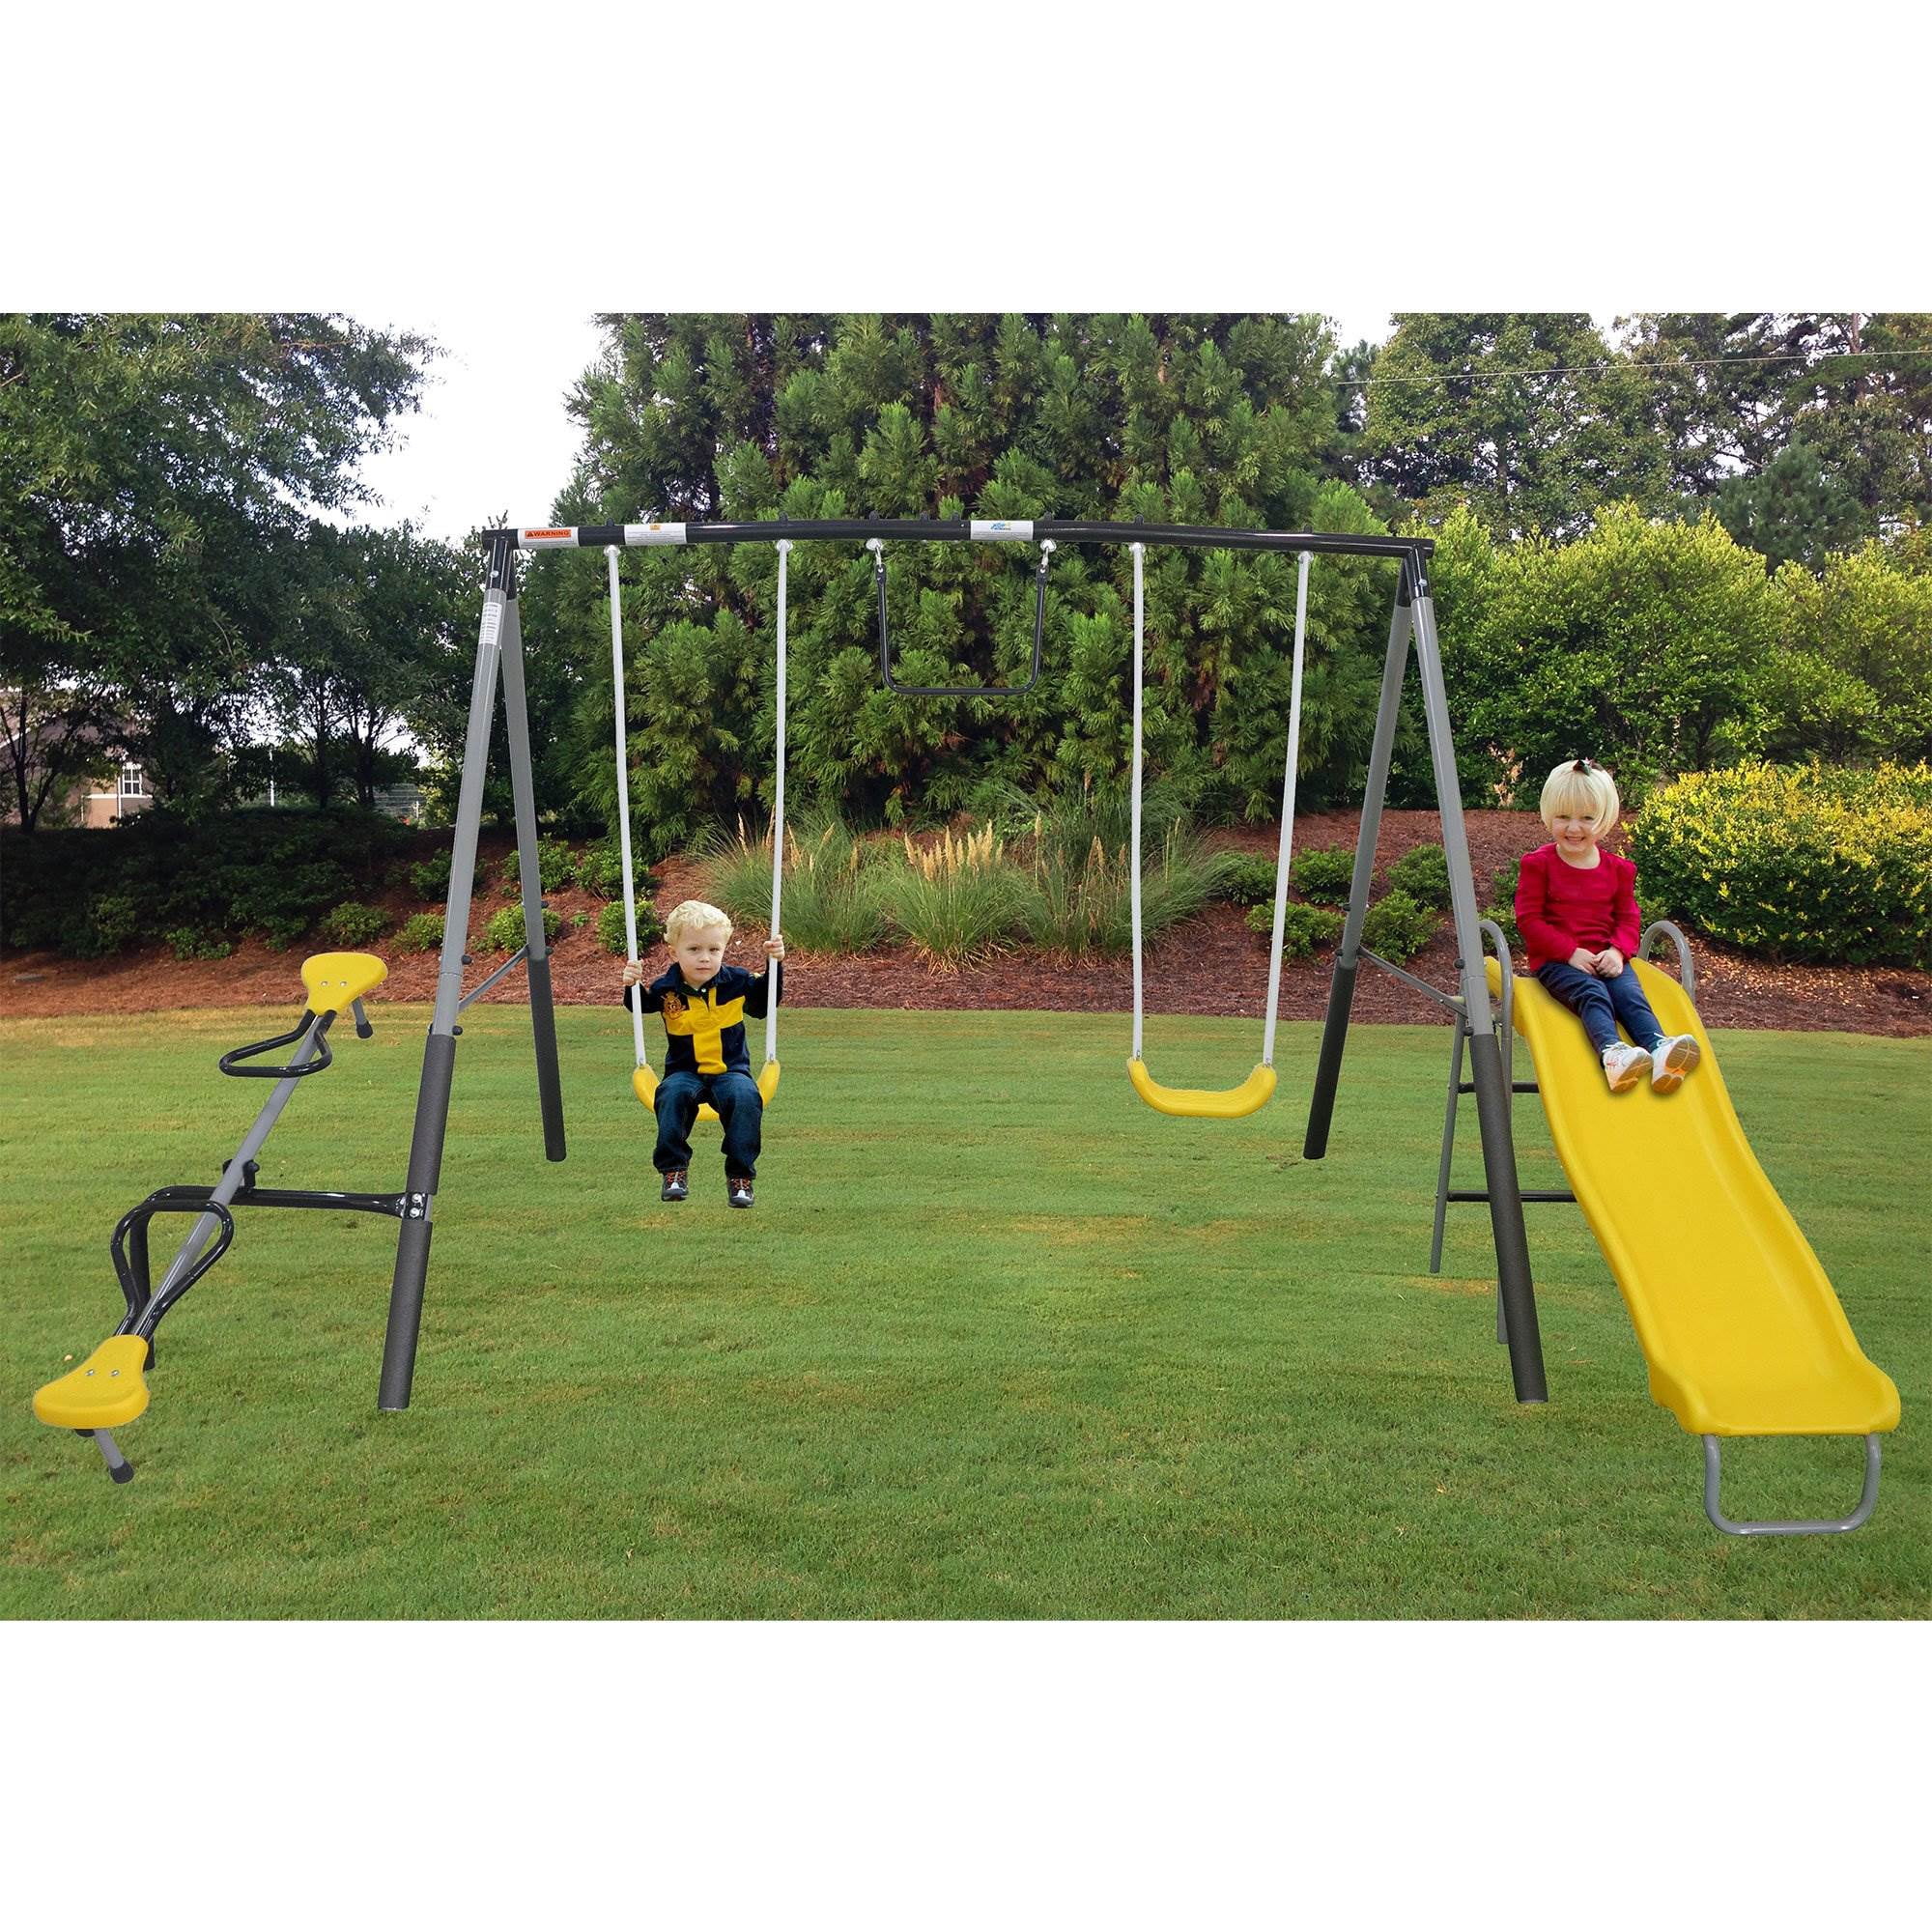 Open Box Recreation All-Star Outdoor Playground Kids Play/Swing Set